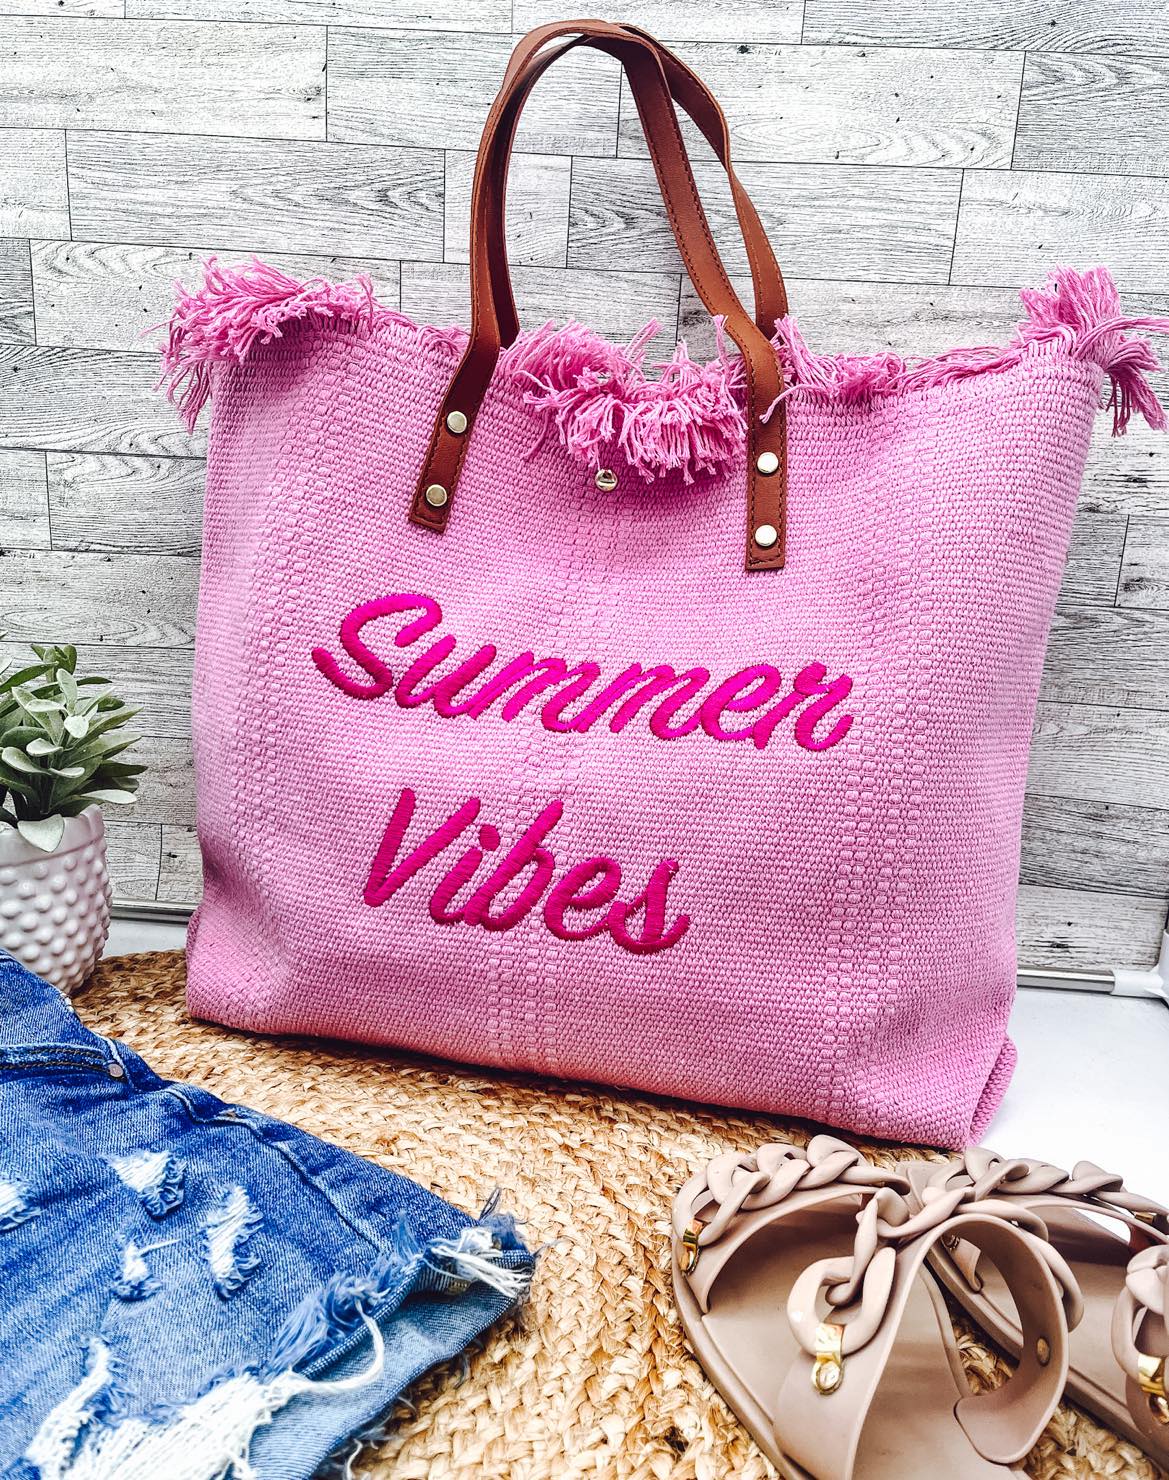 rts: Summer Vibes embroidered Knitted Canvas Tote